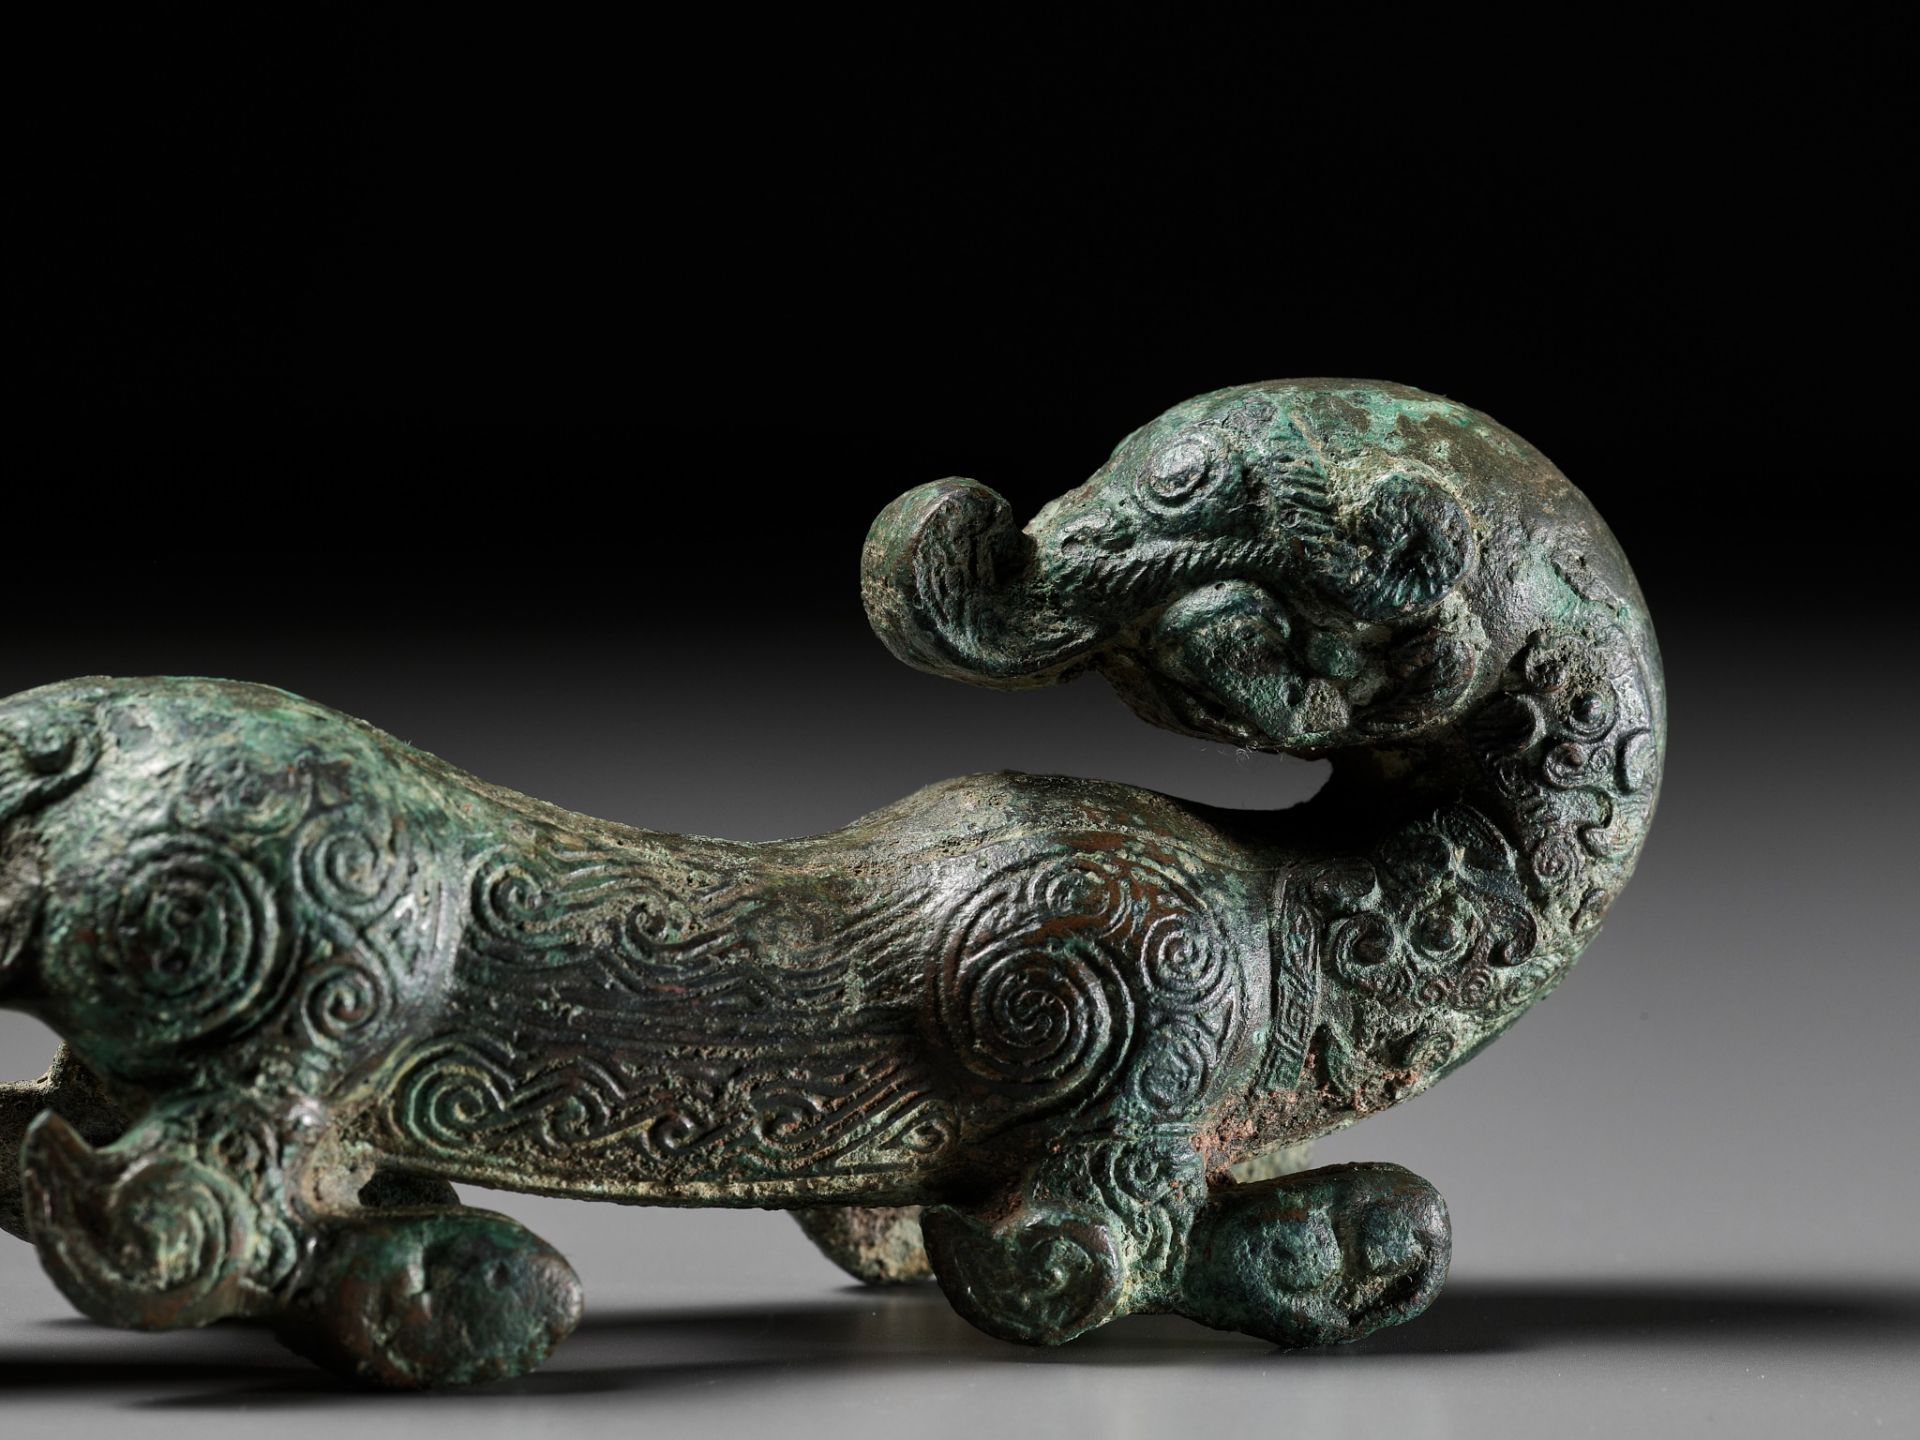 A SUPERB BRONZE FIGURE OF A DRAGON, EASTERN ZHOU DYNASTY, CHINA, 770-256 BC - Image 22 of 23